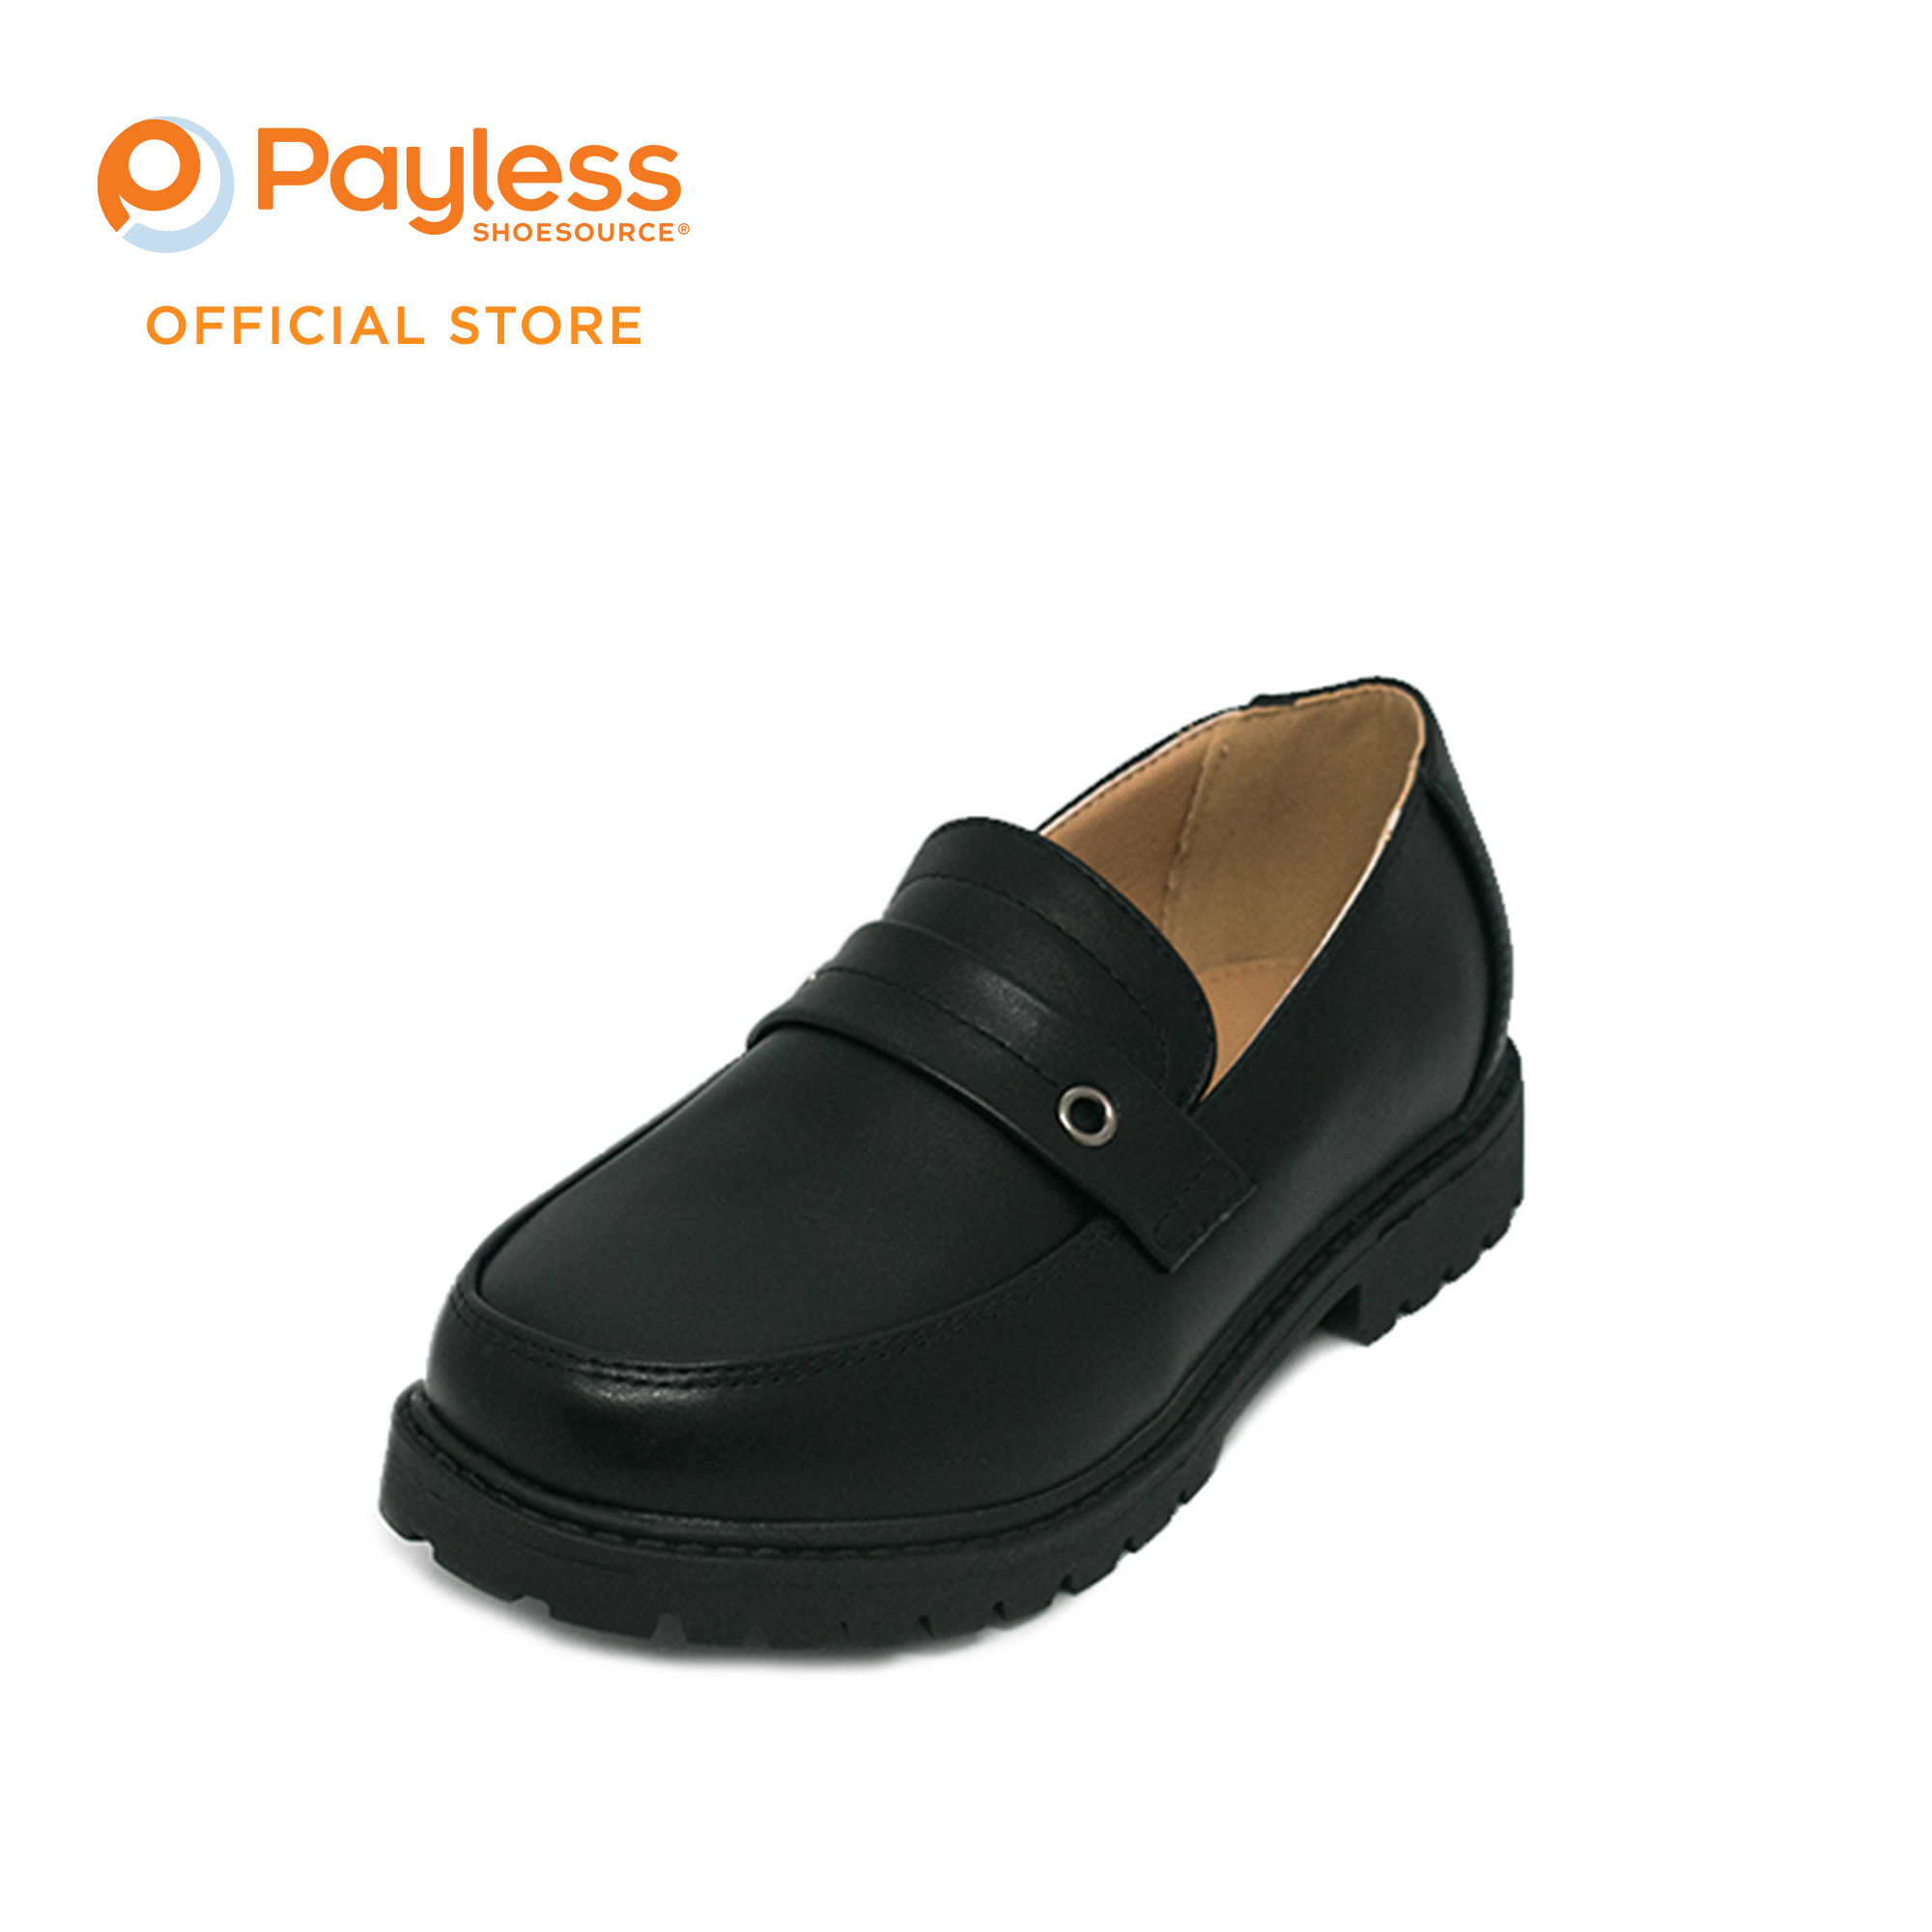 hiking shoes for womens payless philippines